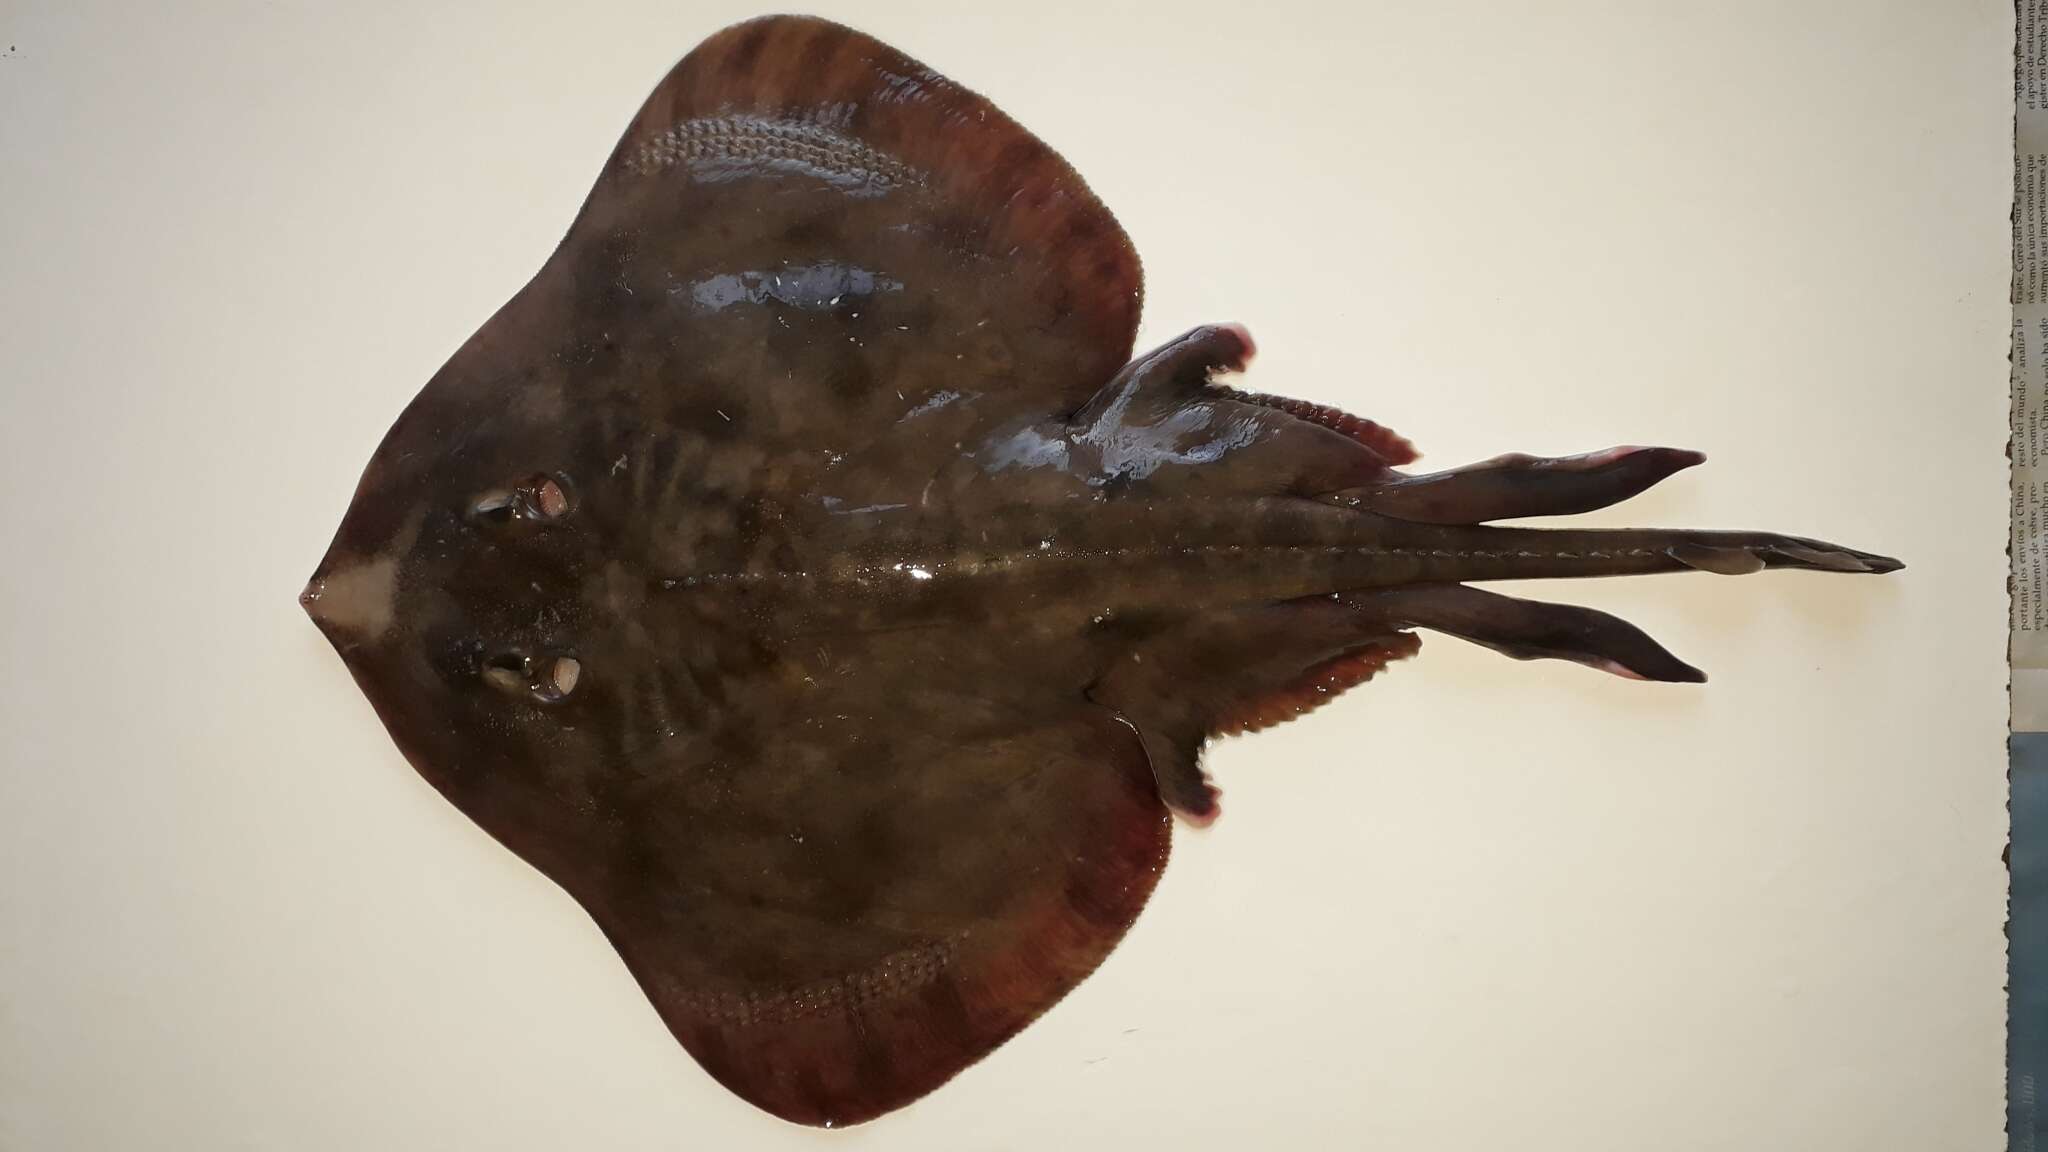 Image of Pacific skate